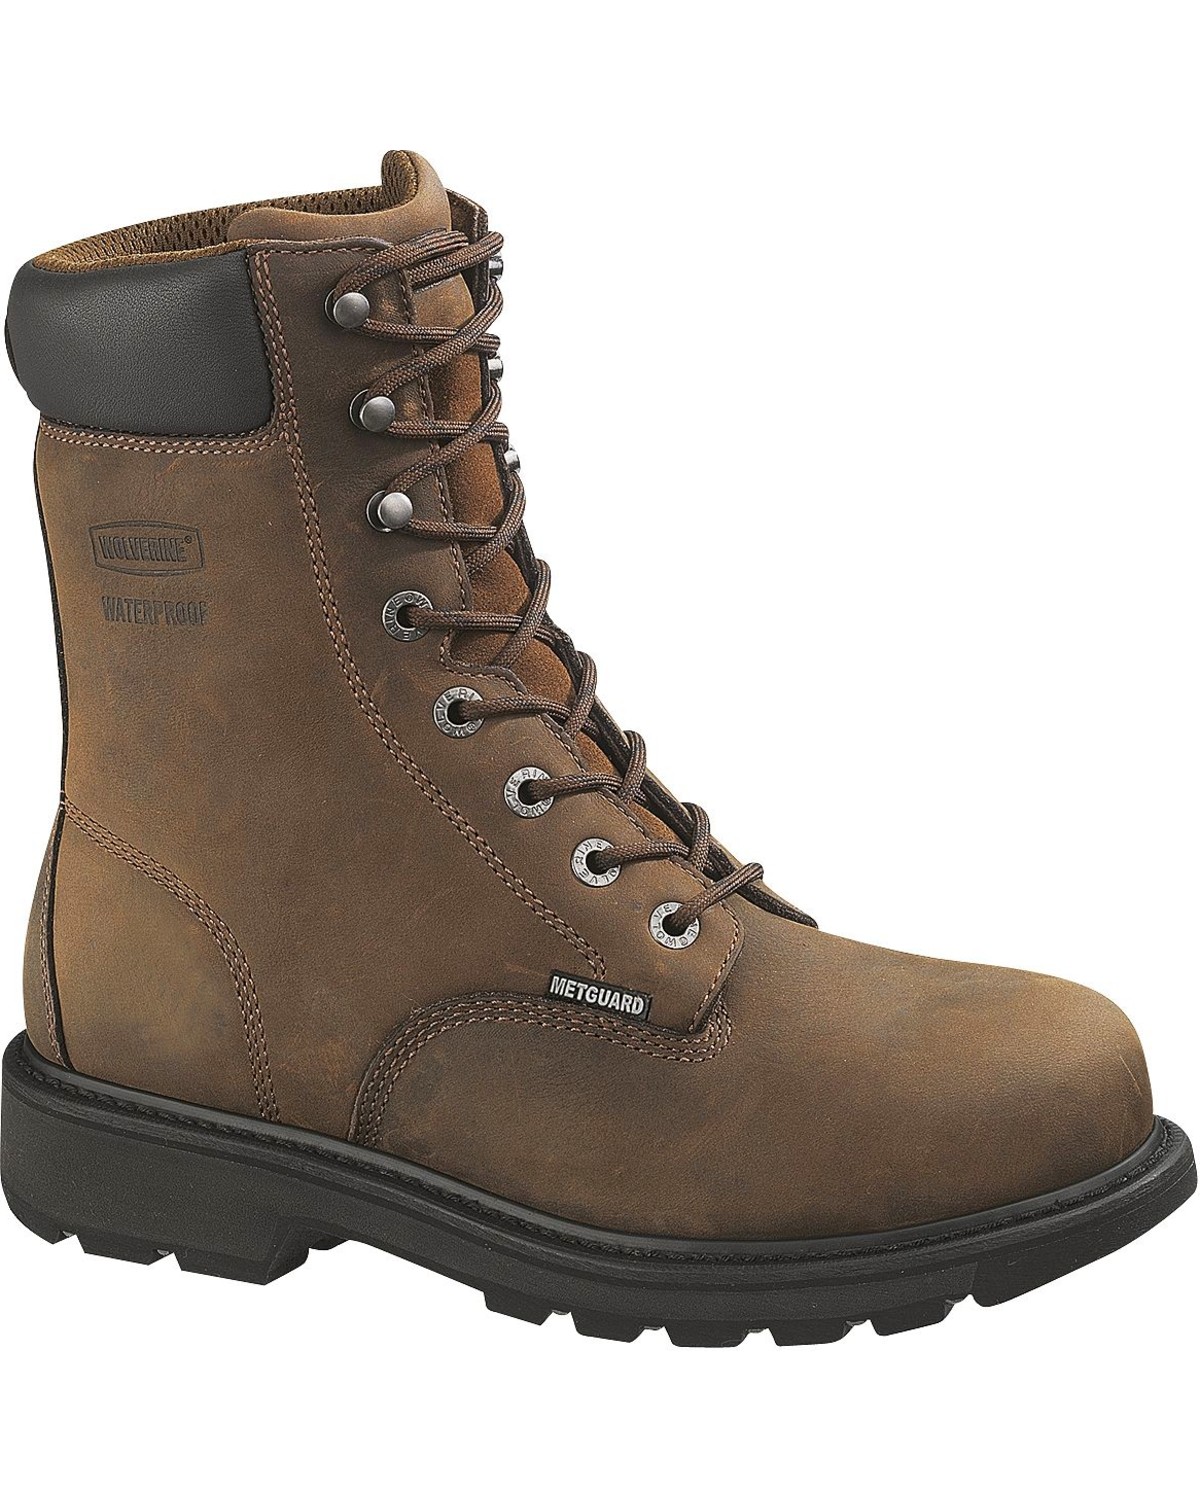 women's work boots with metatarsal guard